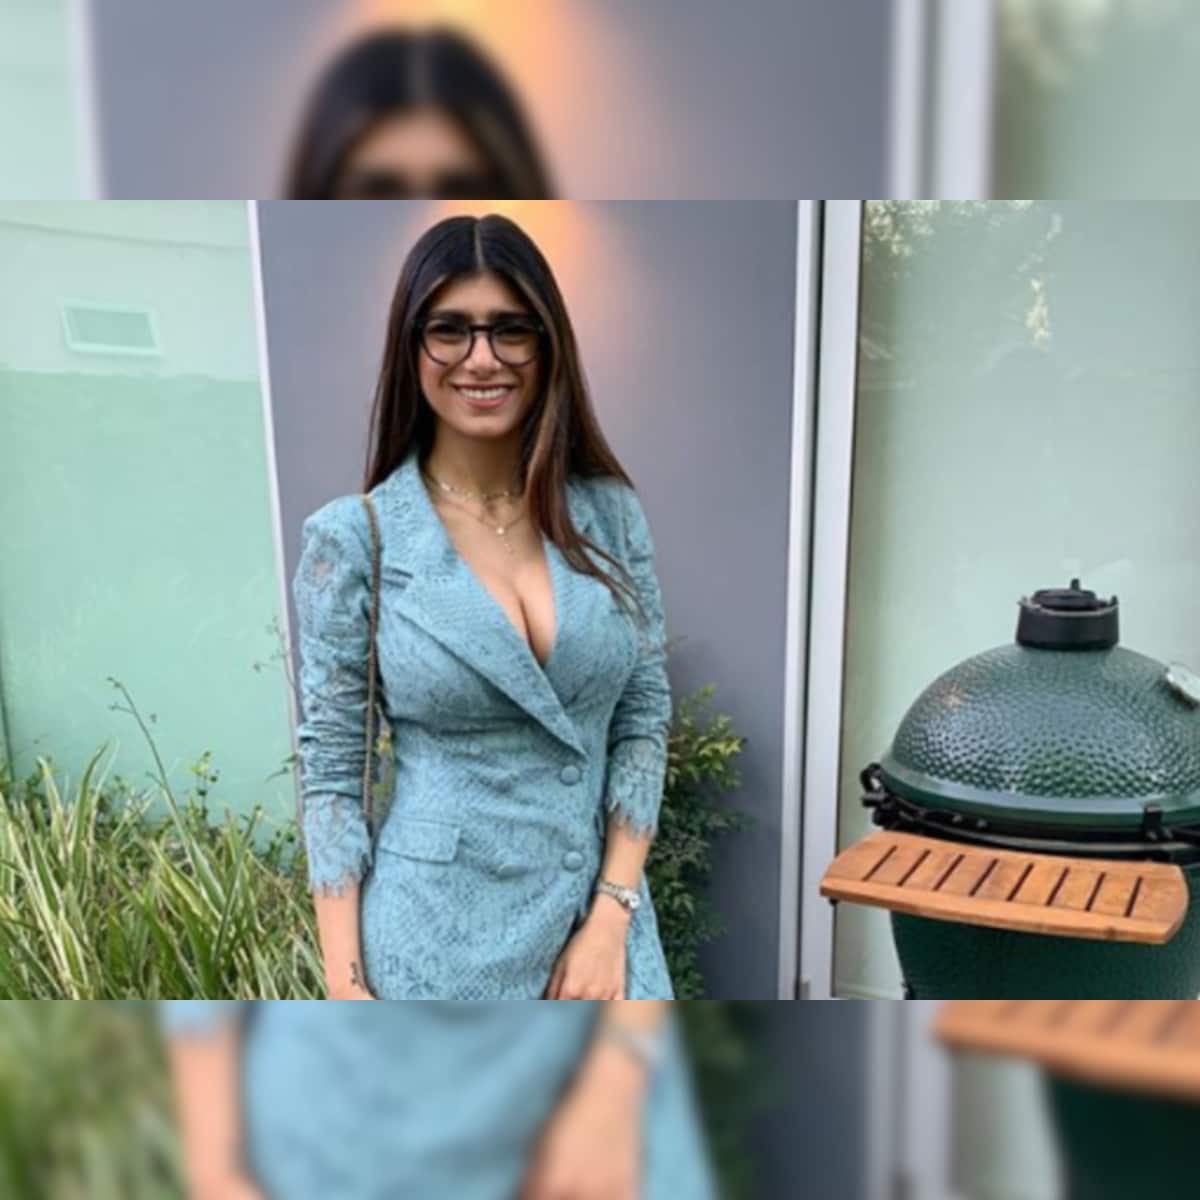 Nangi Film Sex Industry - Mia Khalifa Reveals That She Only Made a Total of Rs 8.5 Lakhs in the Adult  Film Industry